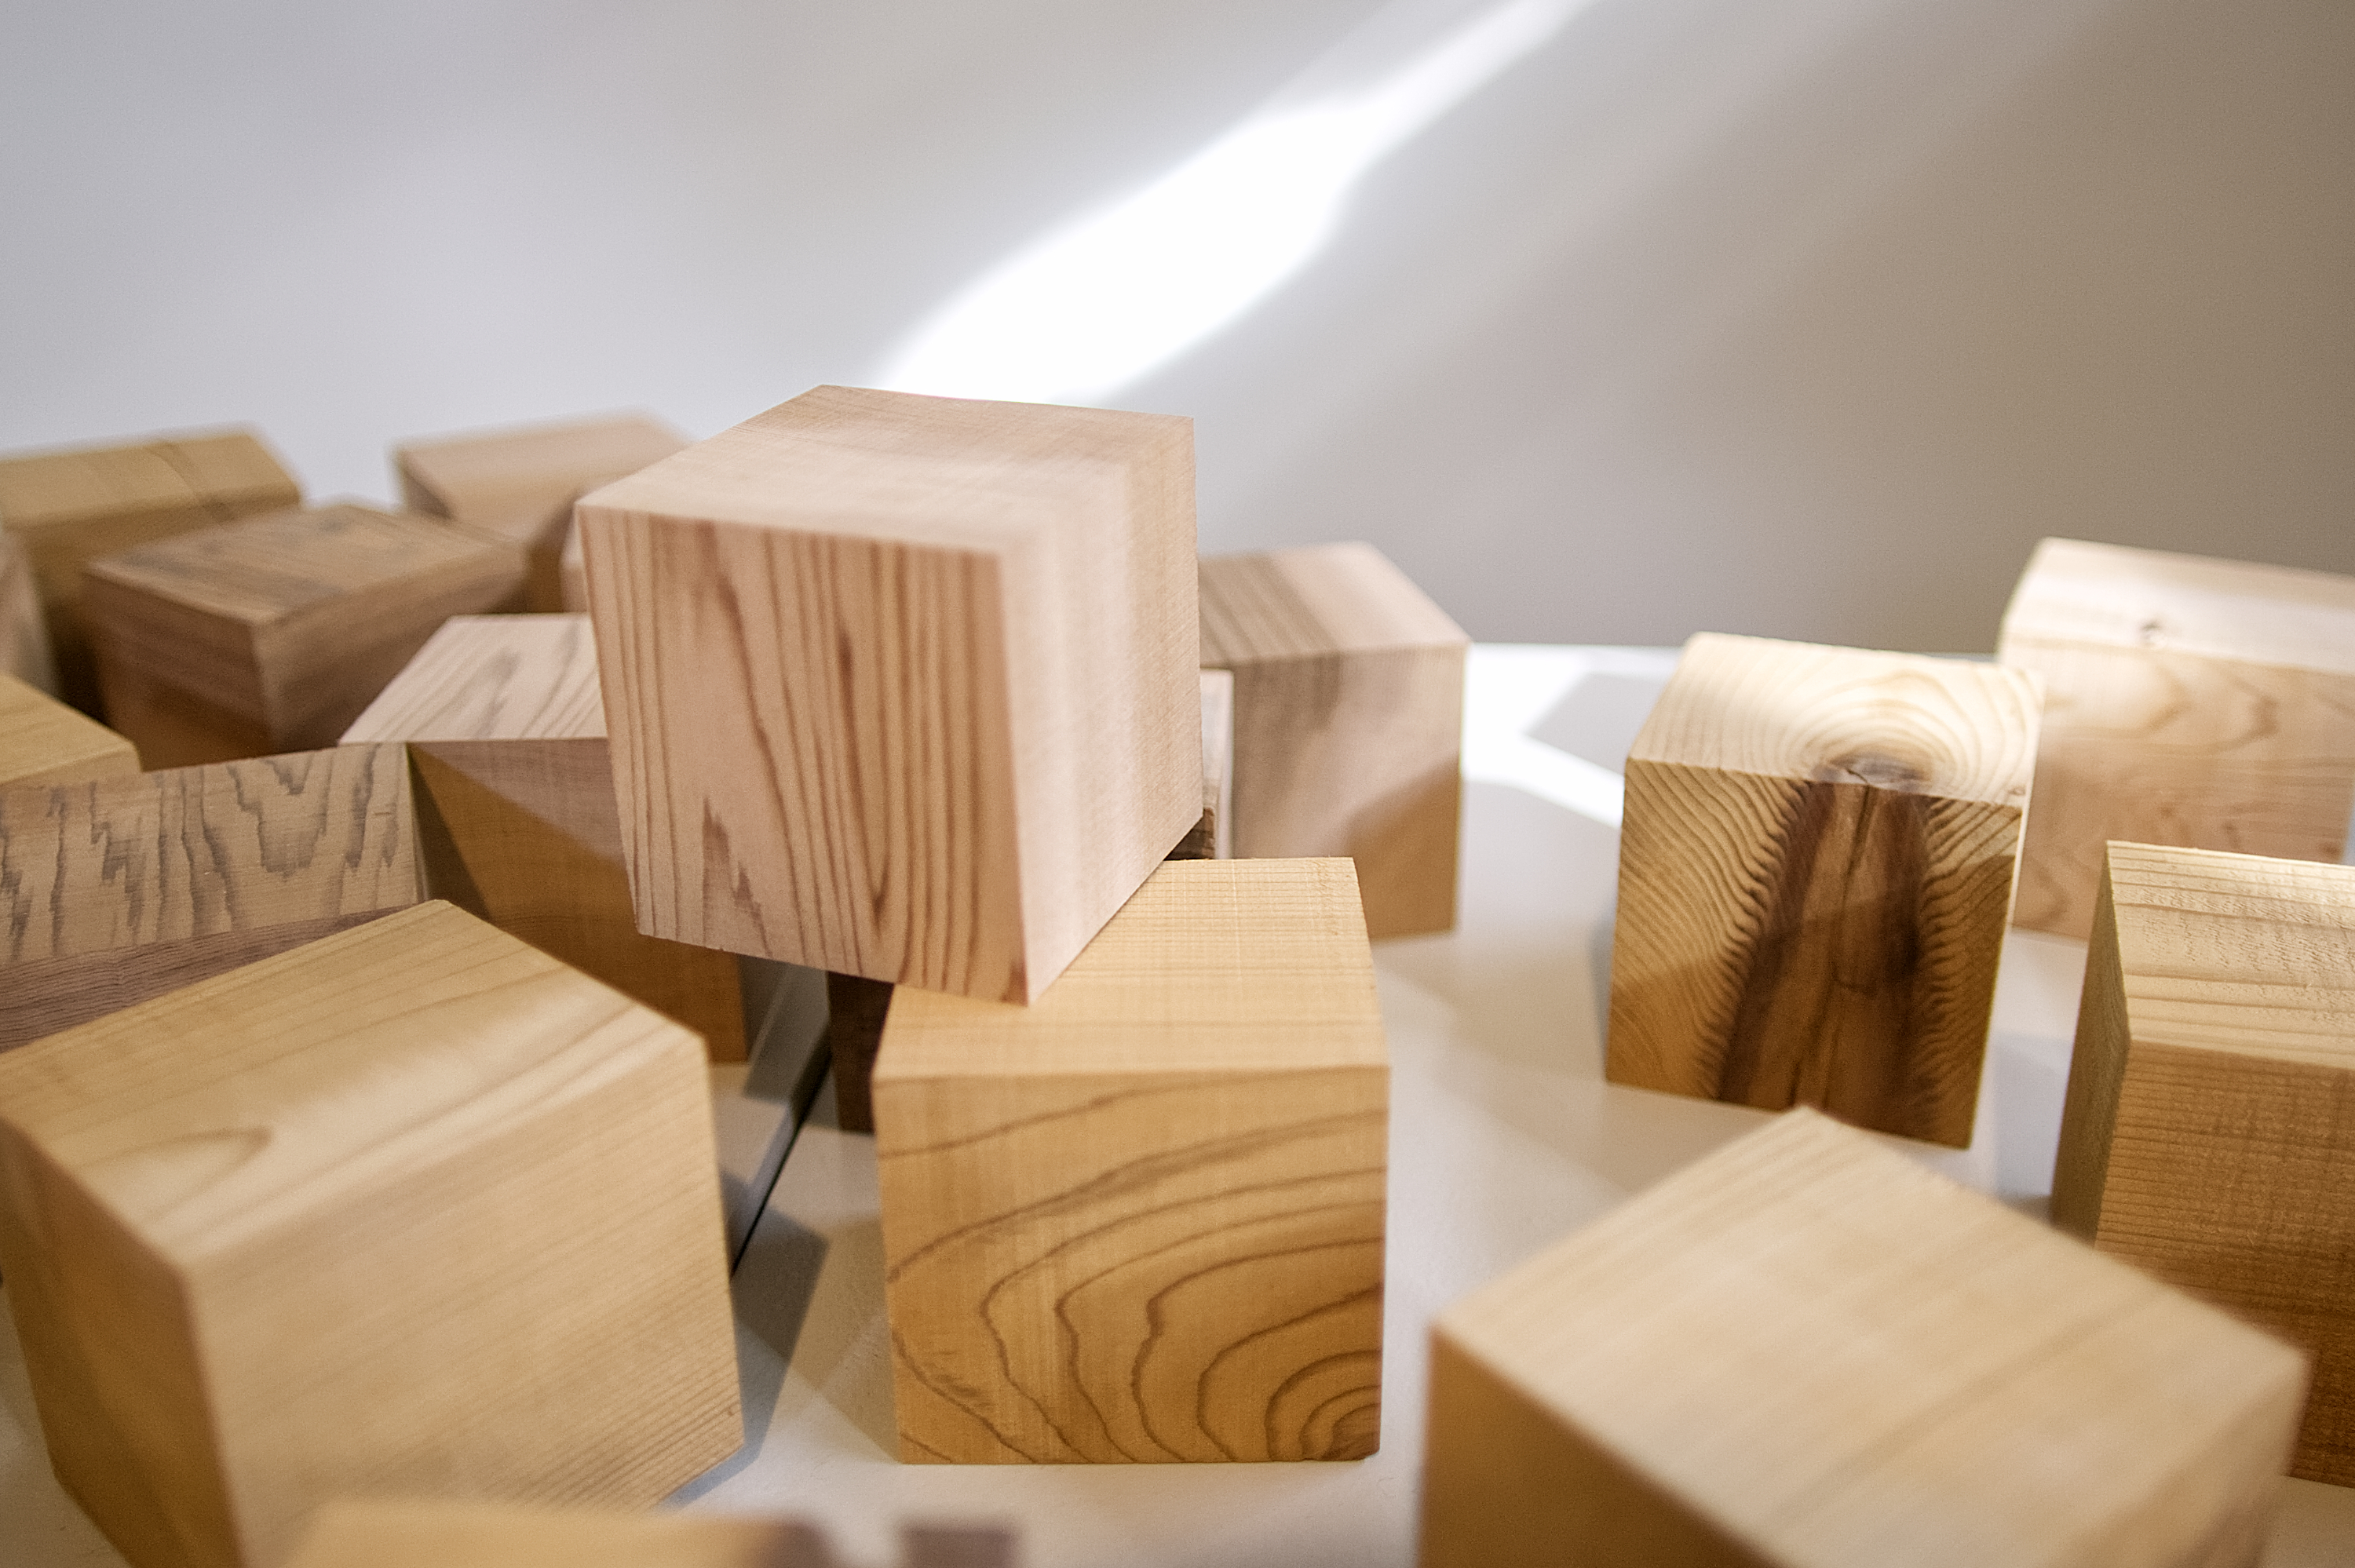 An inventory represented in wooden blocks.